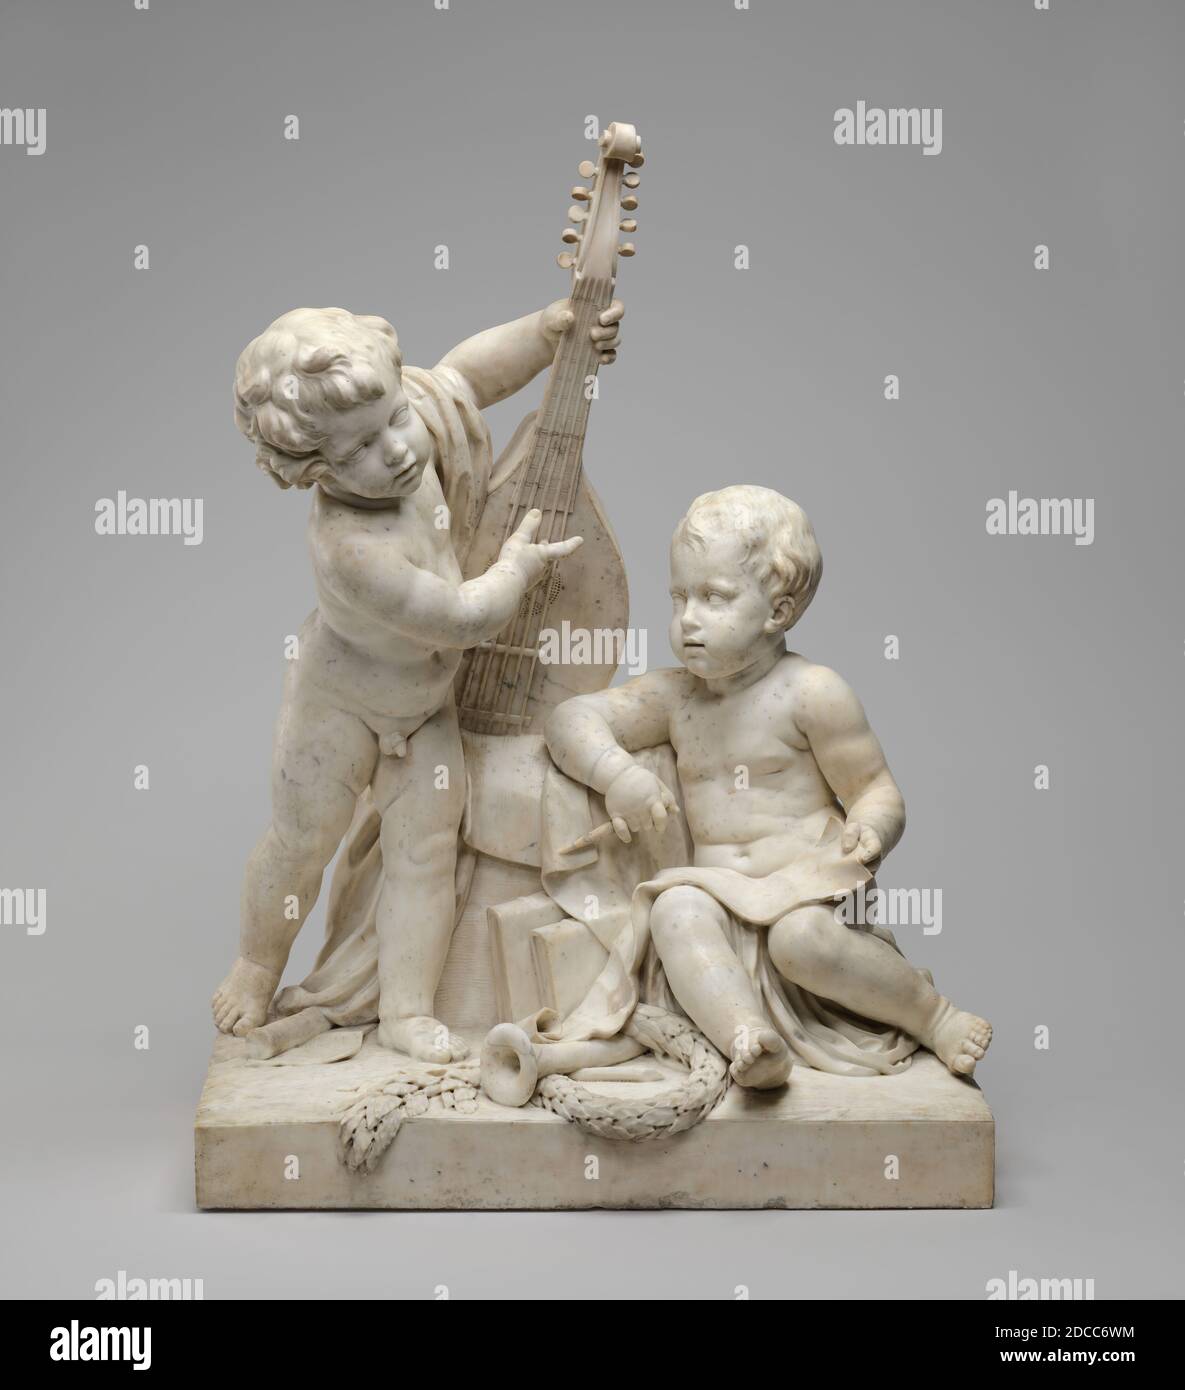 Clodion, (sculptor), French, 1738 - 1814, Poetry and Music, c. 1774/1778, marble, overall: 117.6 x 89.1 x 56 cm (46 5/16 x 35 1/16 x 22 1/16 in.), gross weight: 390.093 kg (860 lb Stock Photo